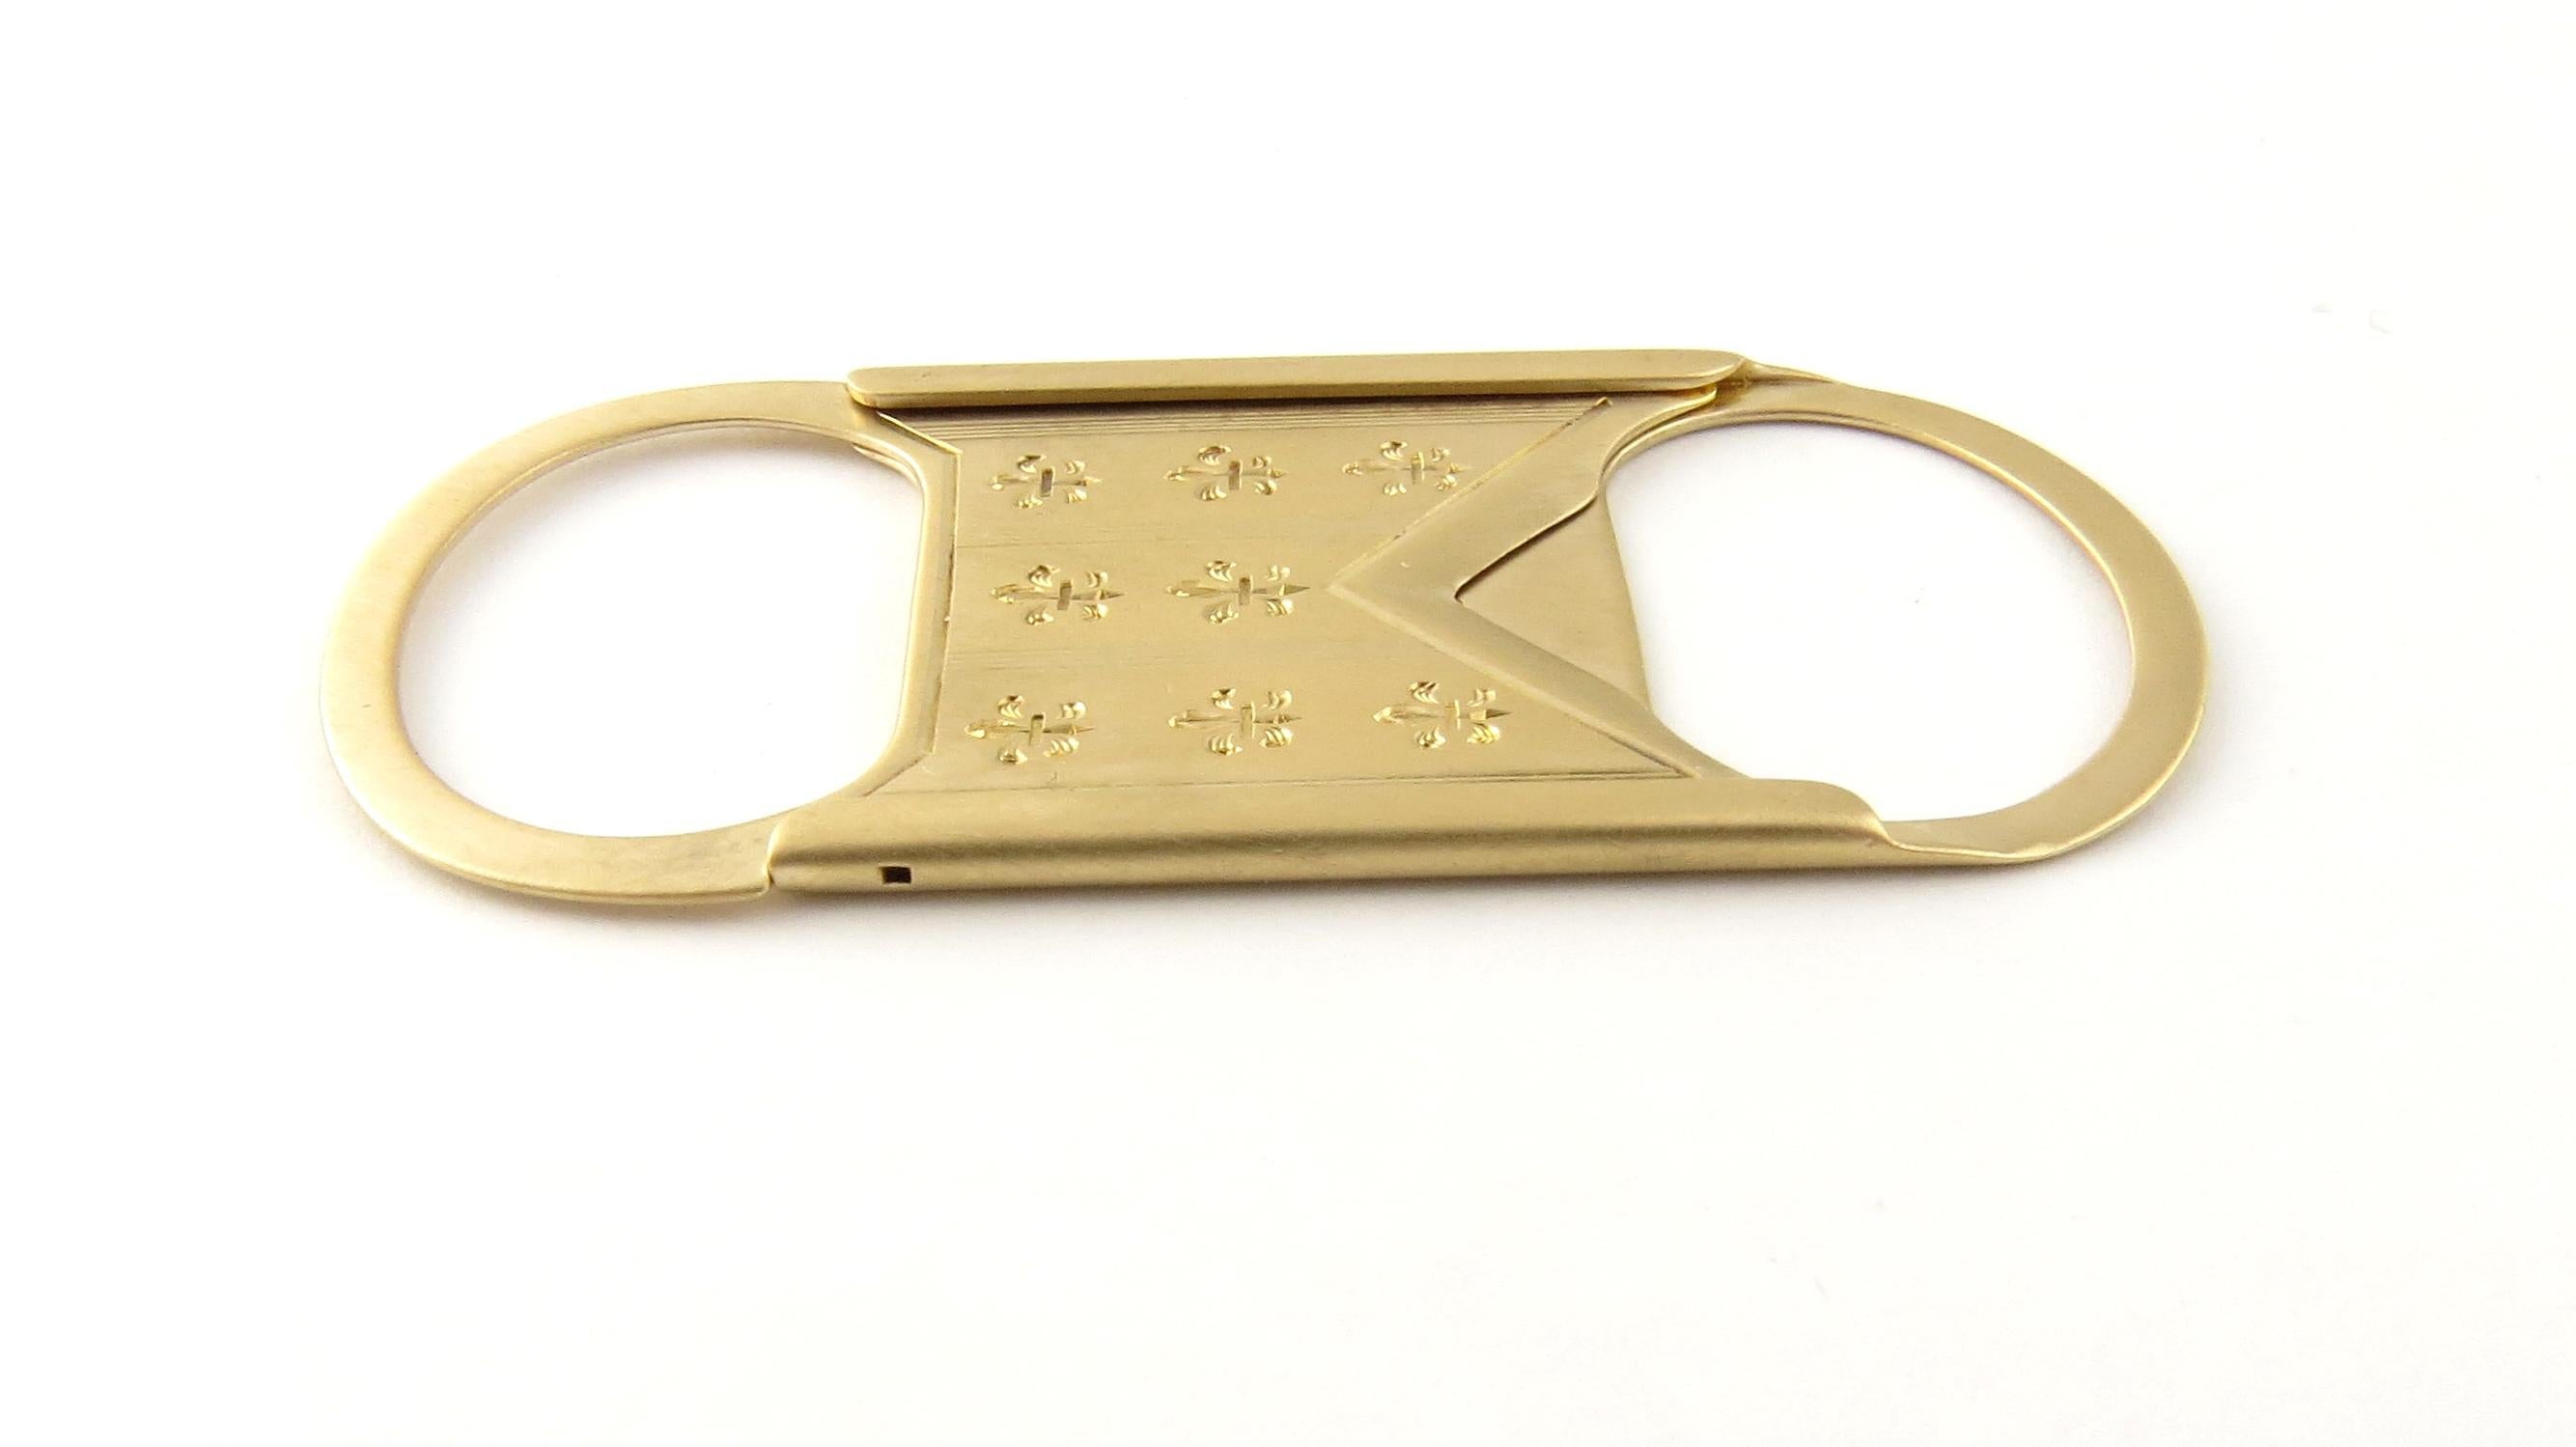 Vintage 14 Karat Yellow Gold Cigar Cutter

This elegant cigar cutter is decorated with fleur de lis and crafted in classic 14K yellow gold.

Size: 53 mm x 24 mm

Weight: 6.3 dwt. / 9.8 gr.

Stamped: 14K

Hallmark: R.S. PATDEC 9 02

Very good